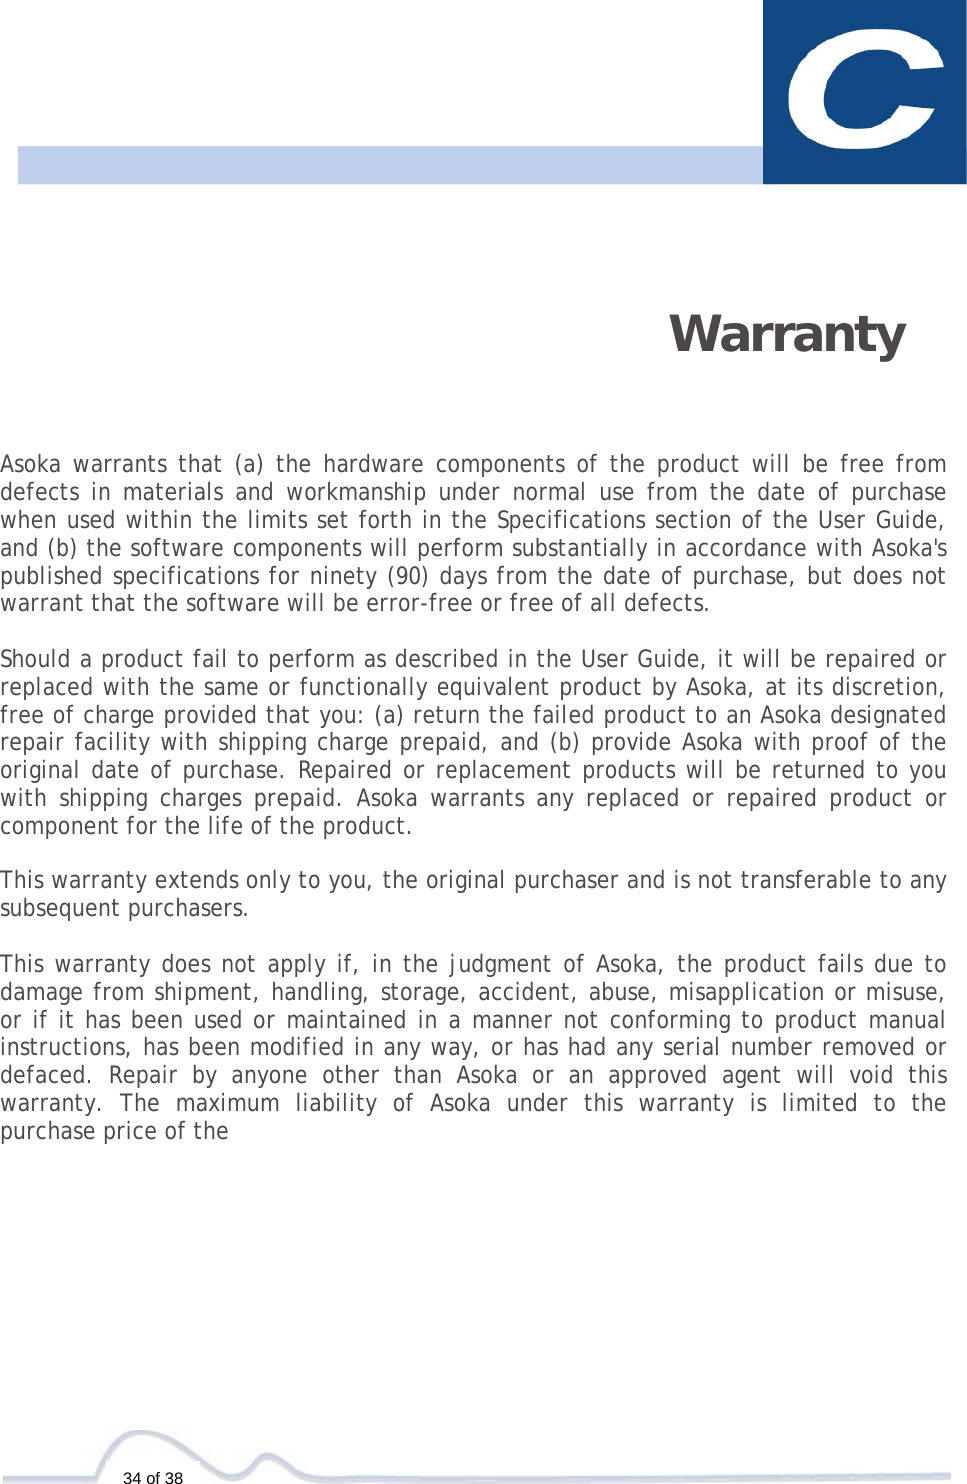   34 of 38     Warranty   Asoka warrants that (a) the hardware components of the product will be free from defects in materials and workmanship under normal use from the date of purchase when used within the limits set forth in the Specifications section of the User Guide, and (b) the software components will perform substantially in accordance with Asoka&apos;s published specifications for ninety (90) days from the date of purchase, but does not warrant that the software will be error-free or free of all defects.  Should a product fail to perform as described in the User Guide, it will be repaired or replaced with the same or functionally equivalent product by Asoka, at its discretion, free of charge provided that you: (a) return the failed product to an Asoka designated repair facility with shipping charge prepaid, and (b) provide Asoka with proof of the original date of purchase. Repaired or replacement products will be returned to you with shipping charges prepaid. Asoka warrants any replaced or repaired product or component for the life of the product.  This warranty extends only to you, the original purchaser and is not transferable to any subsequent purchasers.  This warranty does not apply if, in the judgment of Asoka, the product fails due to damage from shipment, handling, storage, accident, abuse, misapplication or misuse, or if it has been used or maintained in a manner not conforming to product manual instructions, has been modified in any way, or has had any serial number removed or defaced. Repair by anyone other than Asoka or an approved agent will void this warranty. The maximum liability of Asoka under this warranty is limited to the purchase price of the 